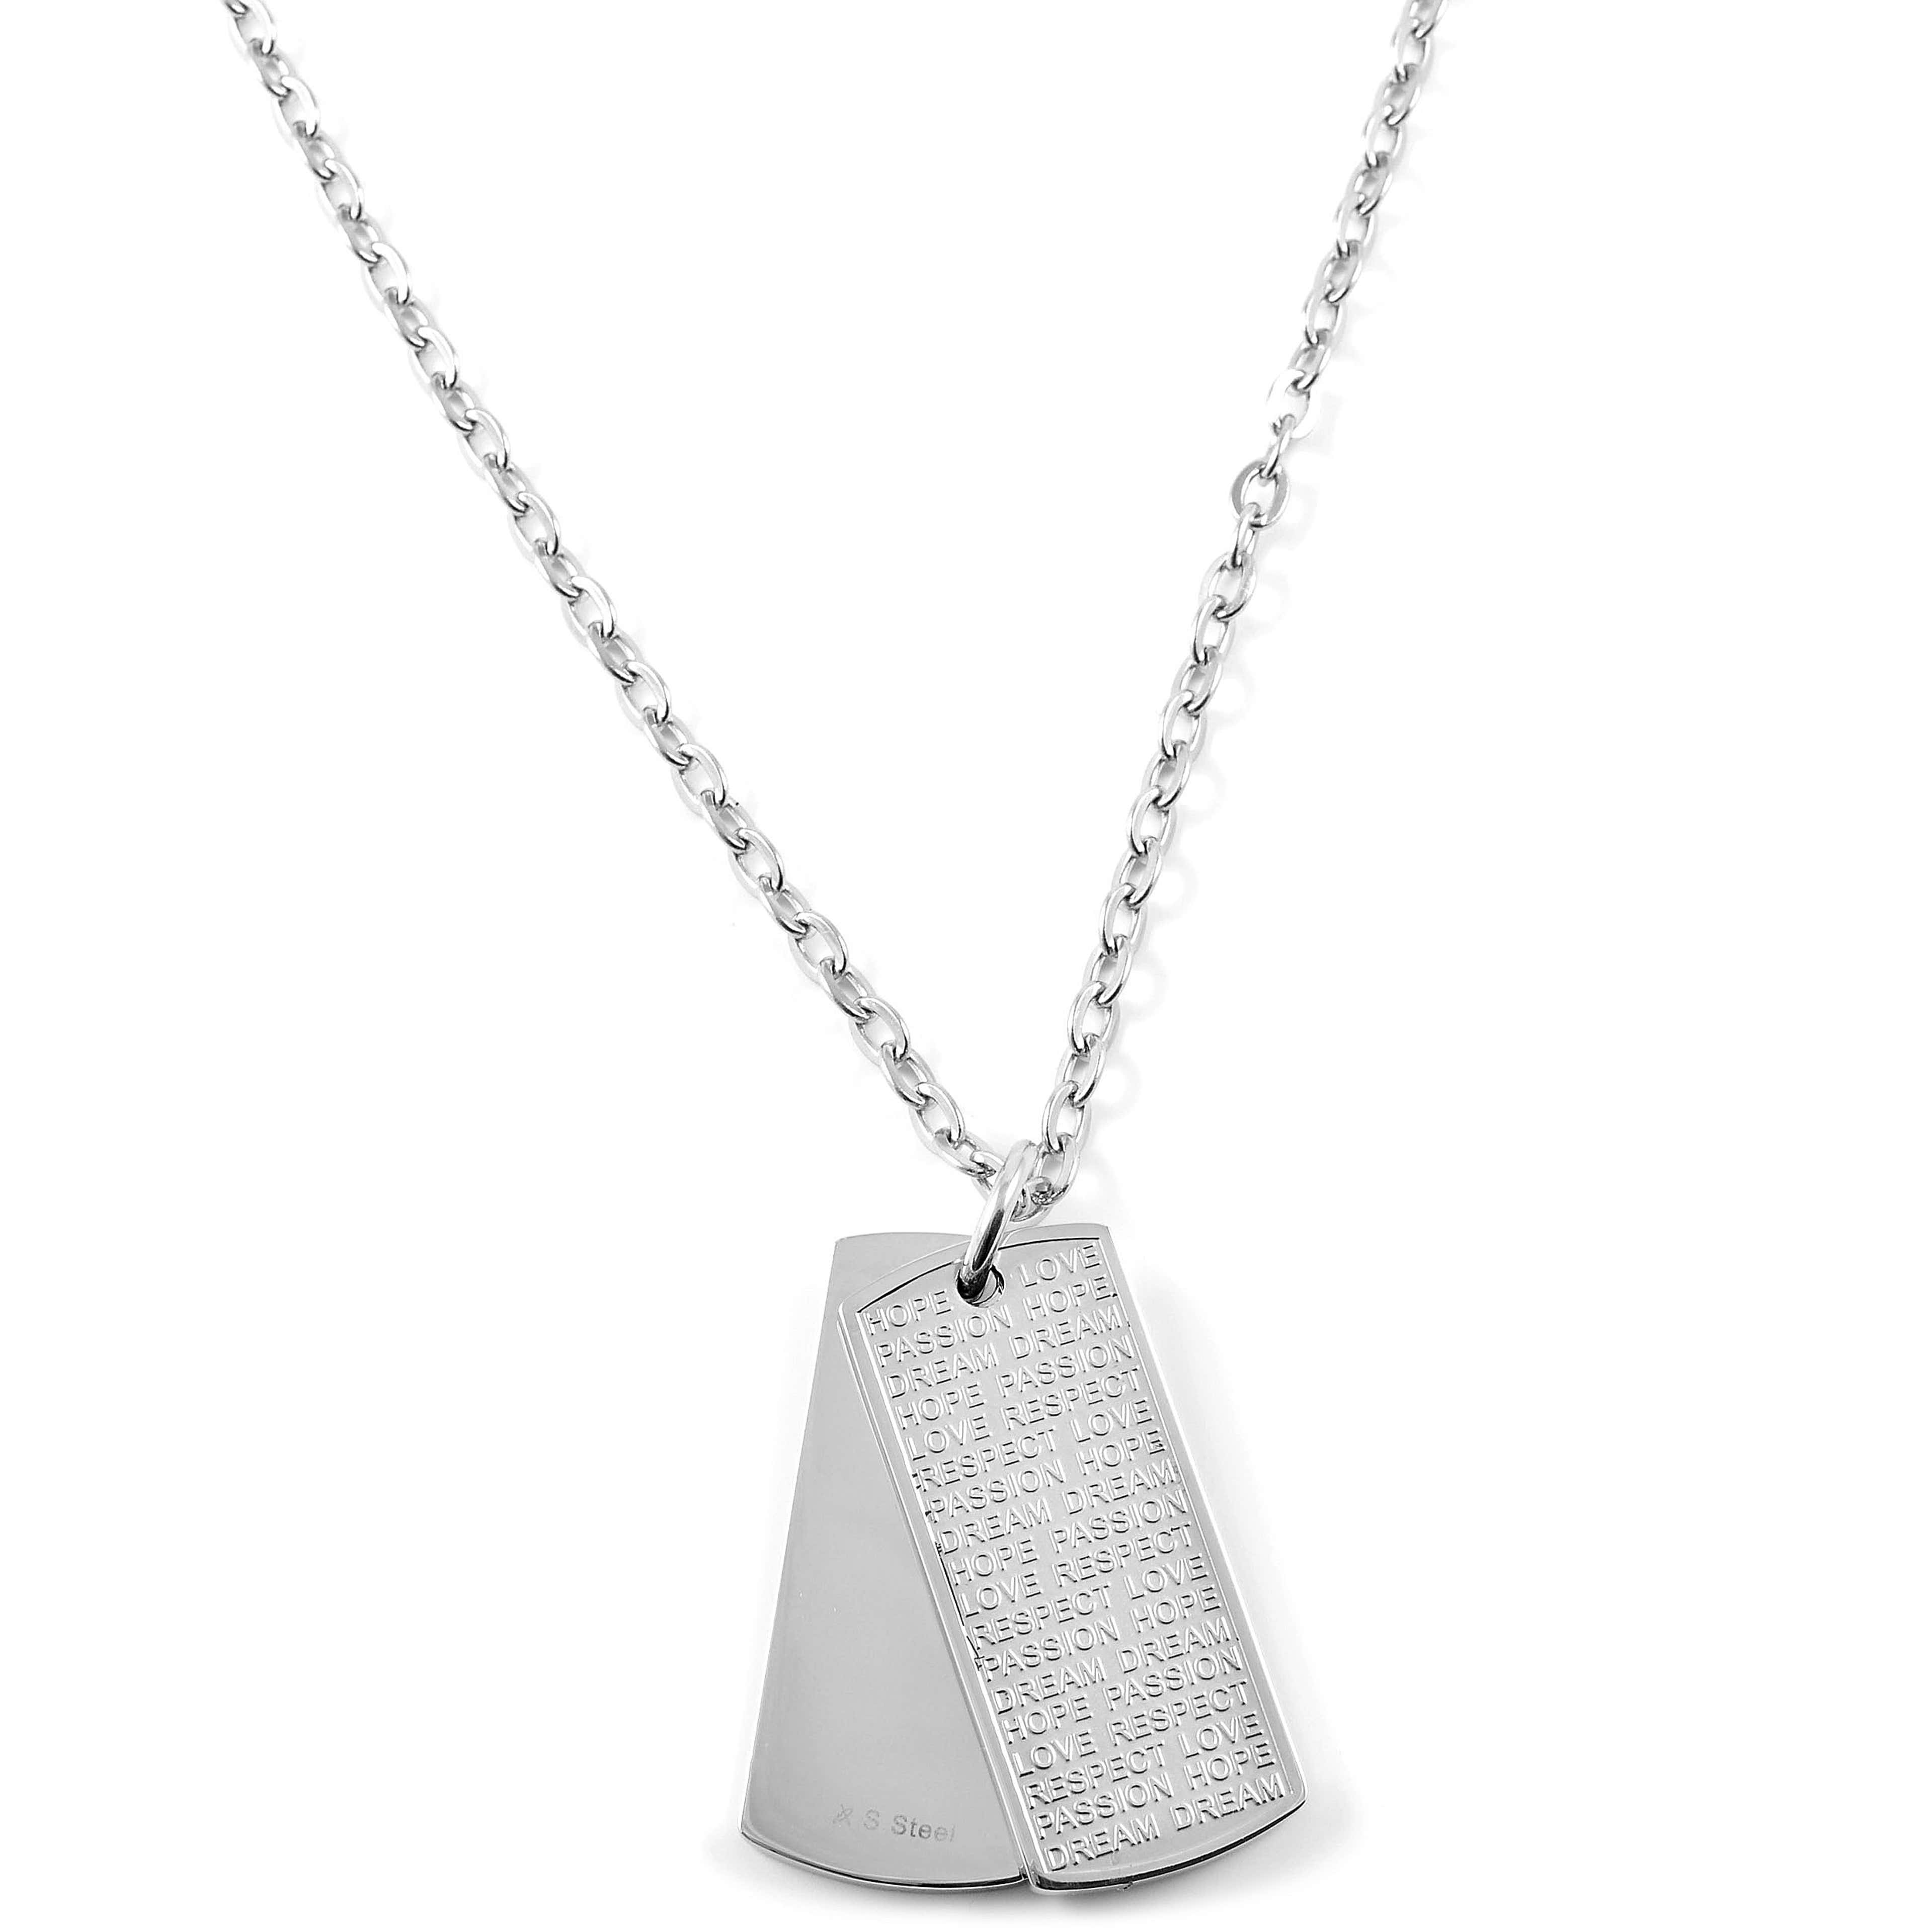 Silver-Tone Statement Dog Tag Necklace